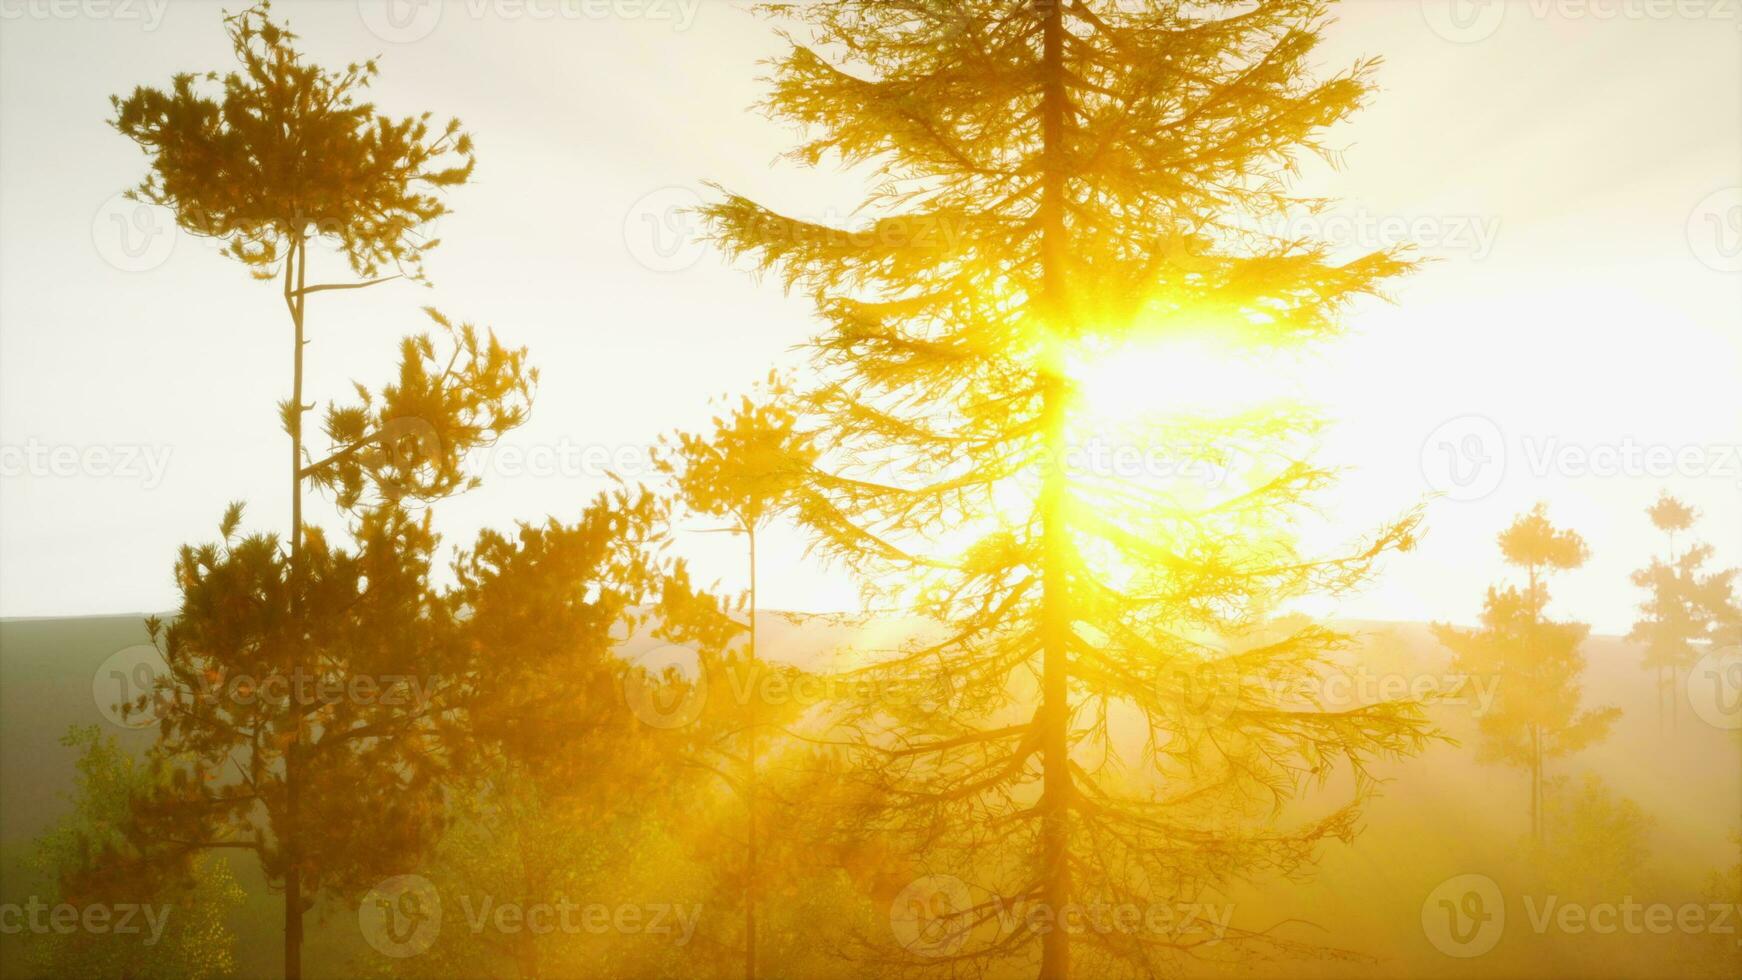 Magnificent sunlight streaming through pine boughs photo